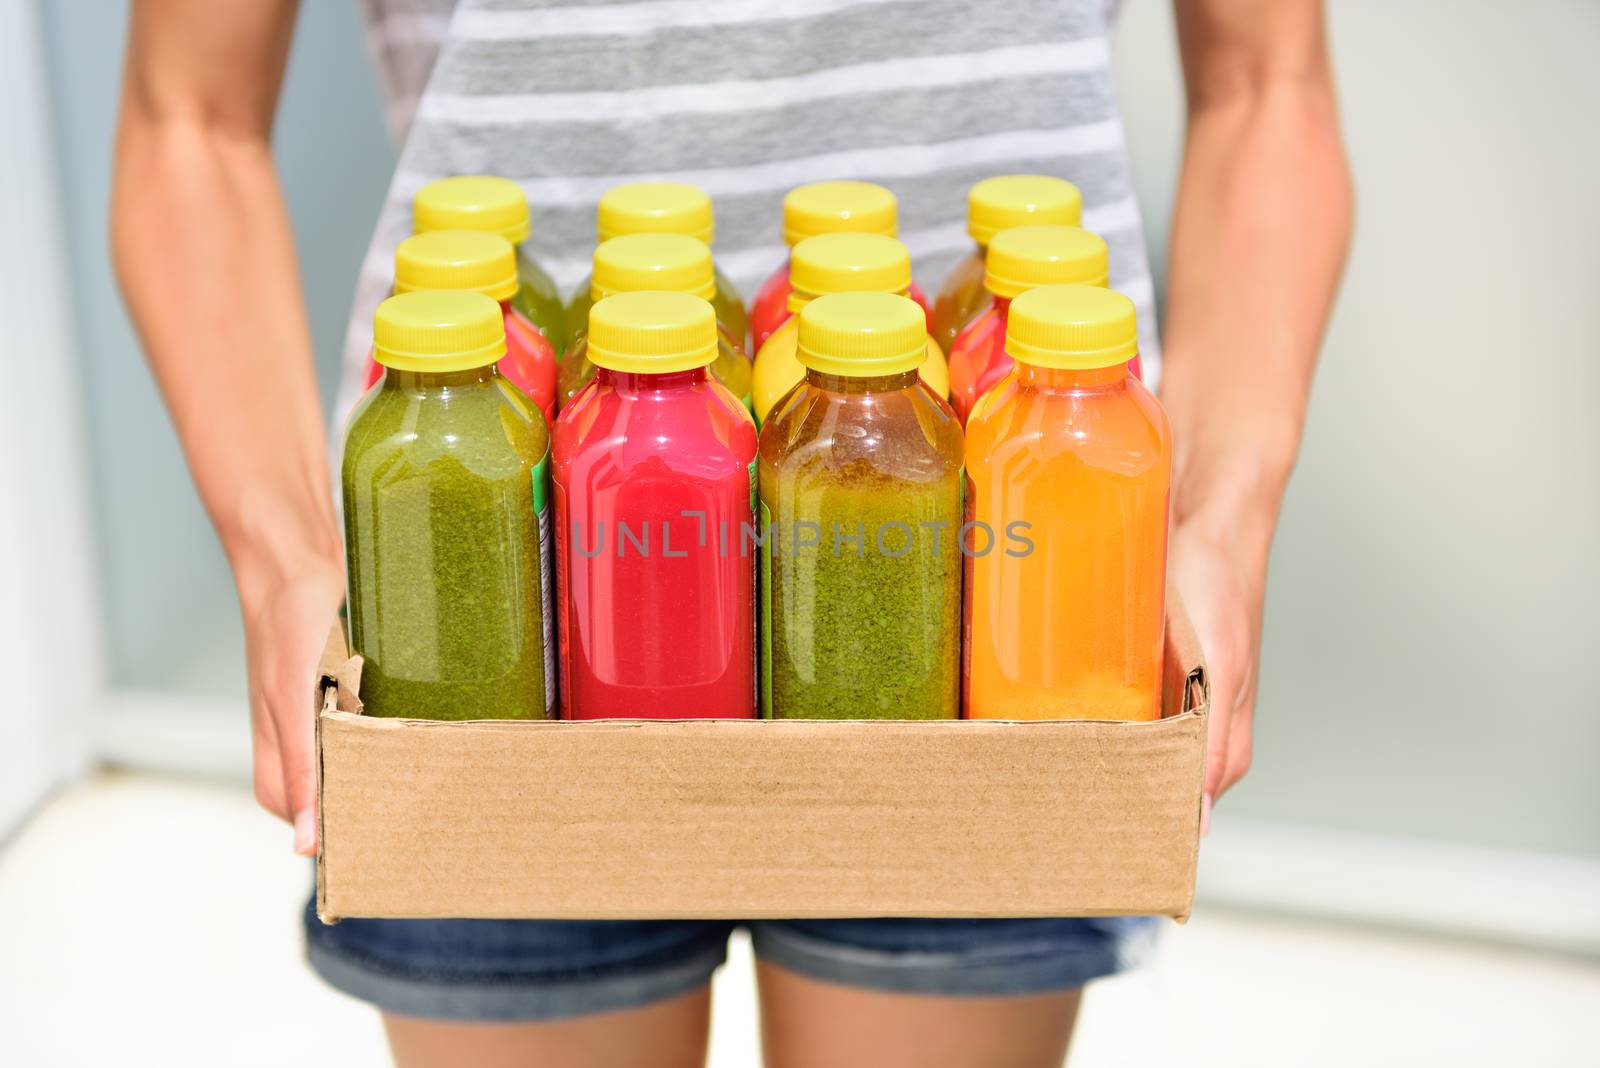 Juicing cold pressed vegetable juices for a detox diet. Dieting by cleansing your body from toxins with raw organic fruits and vegetables juice made fresh and delivered in bottles.